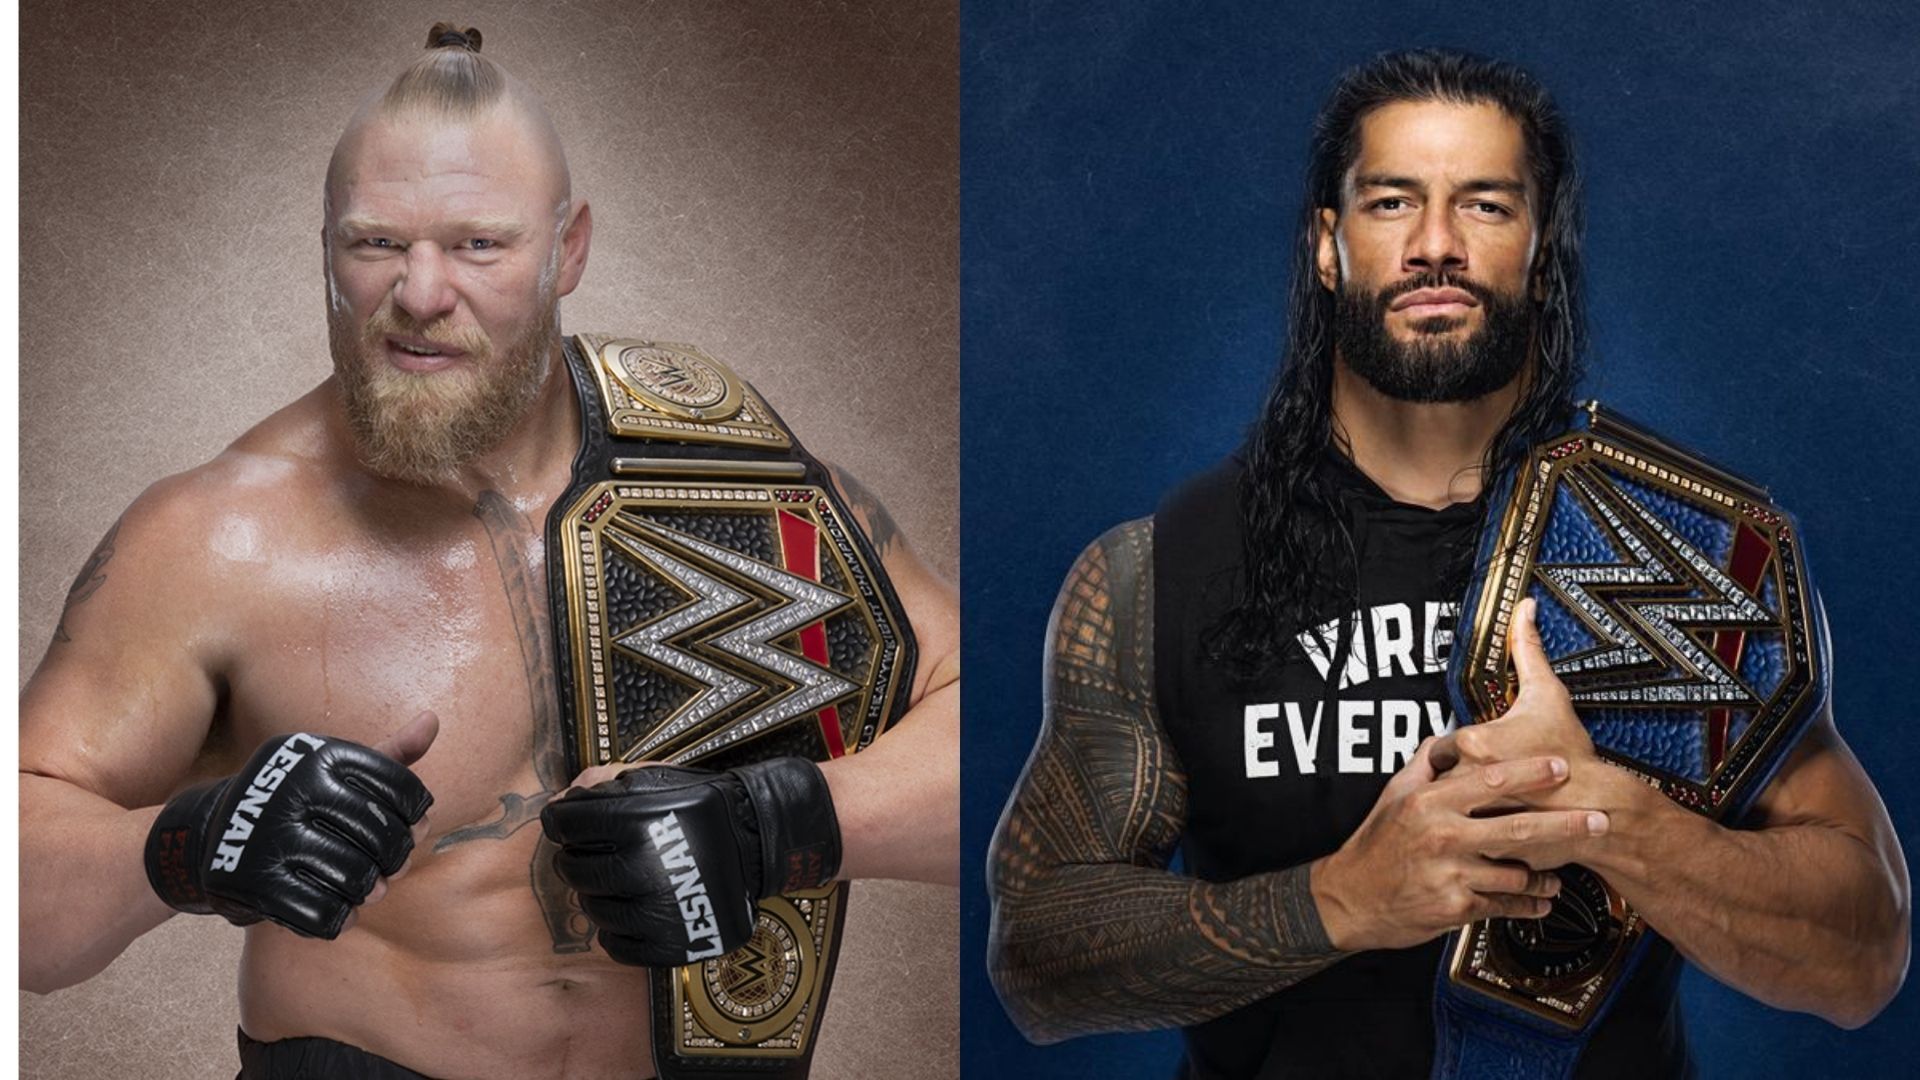 Brock Lesnar vs. Roman Reigns could signal the end of the brand split